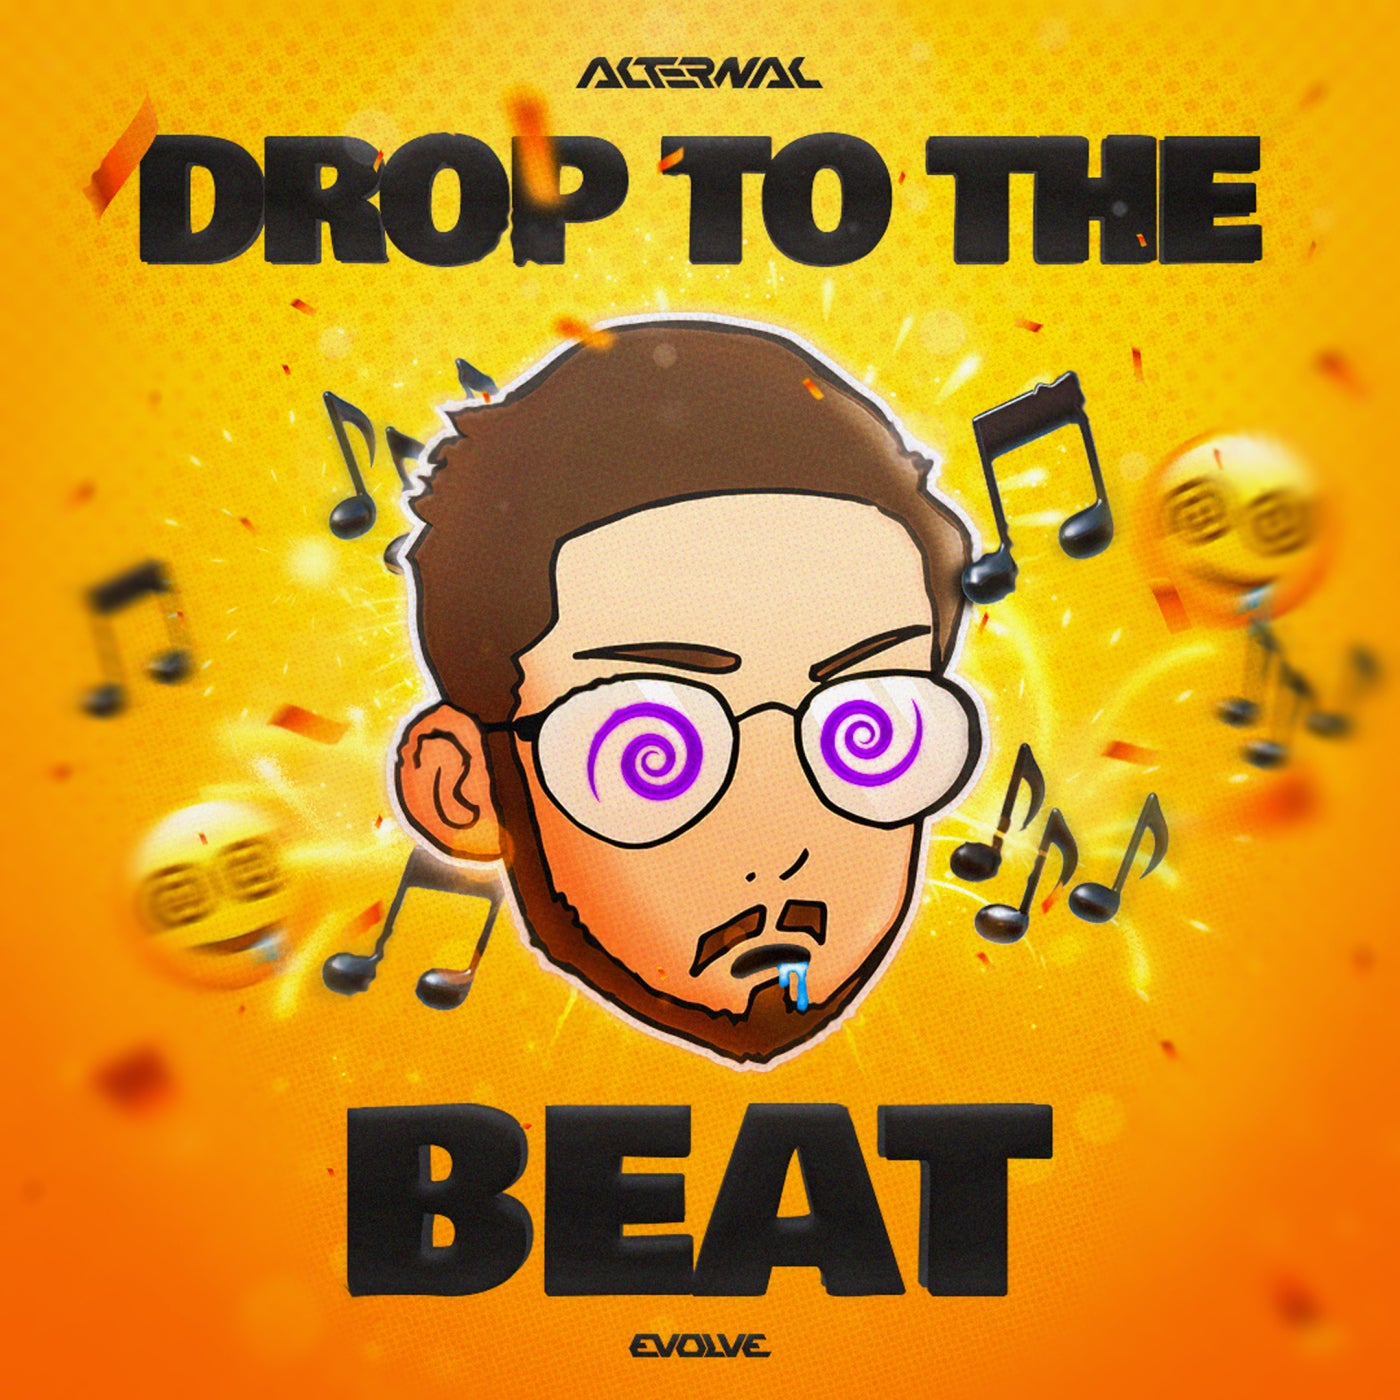 DROP TO THE BEAT